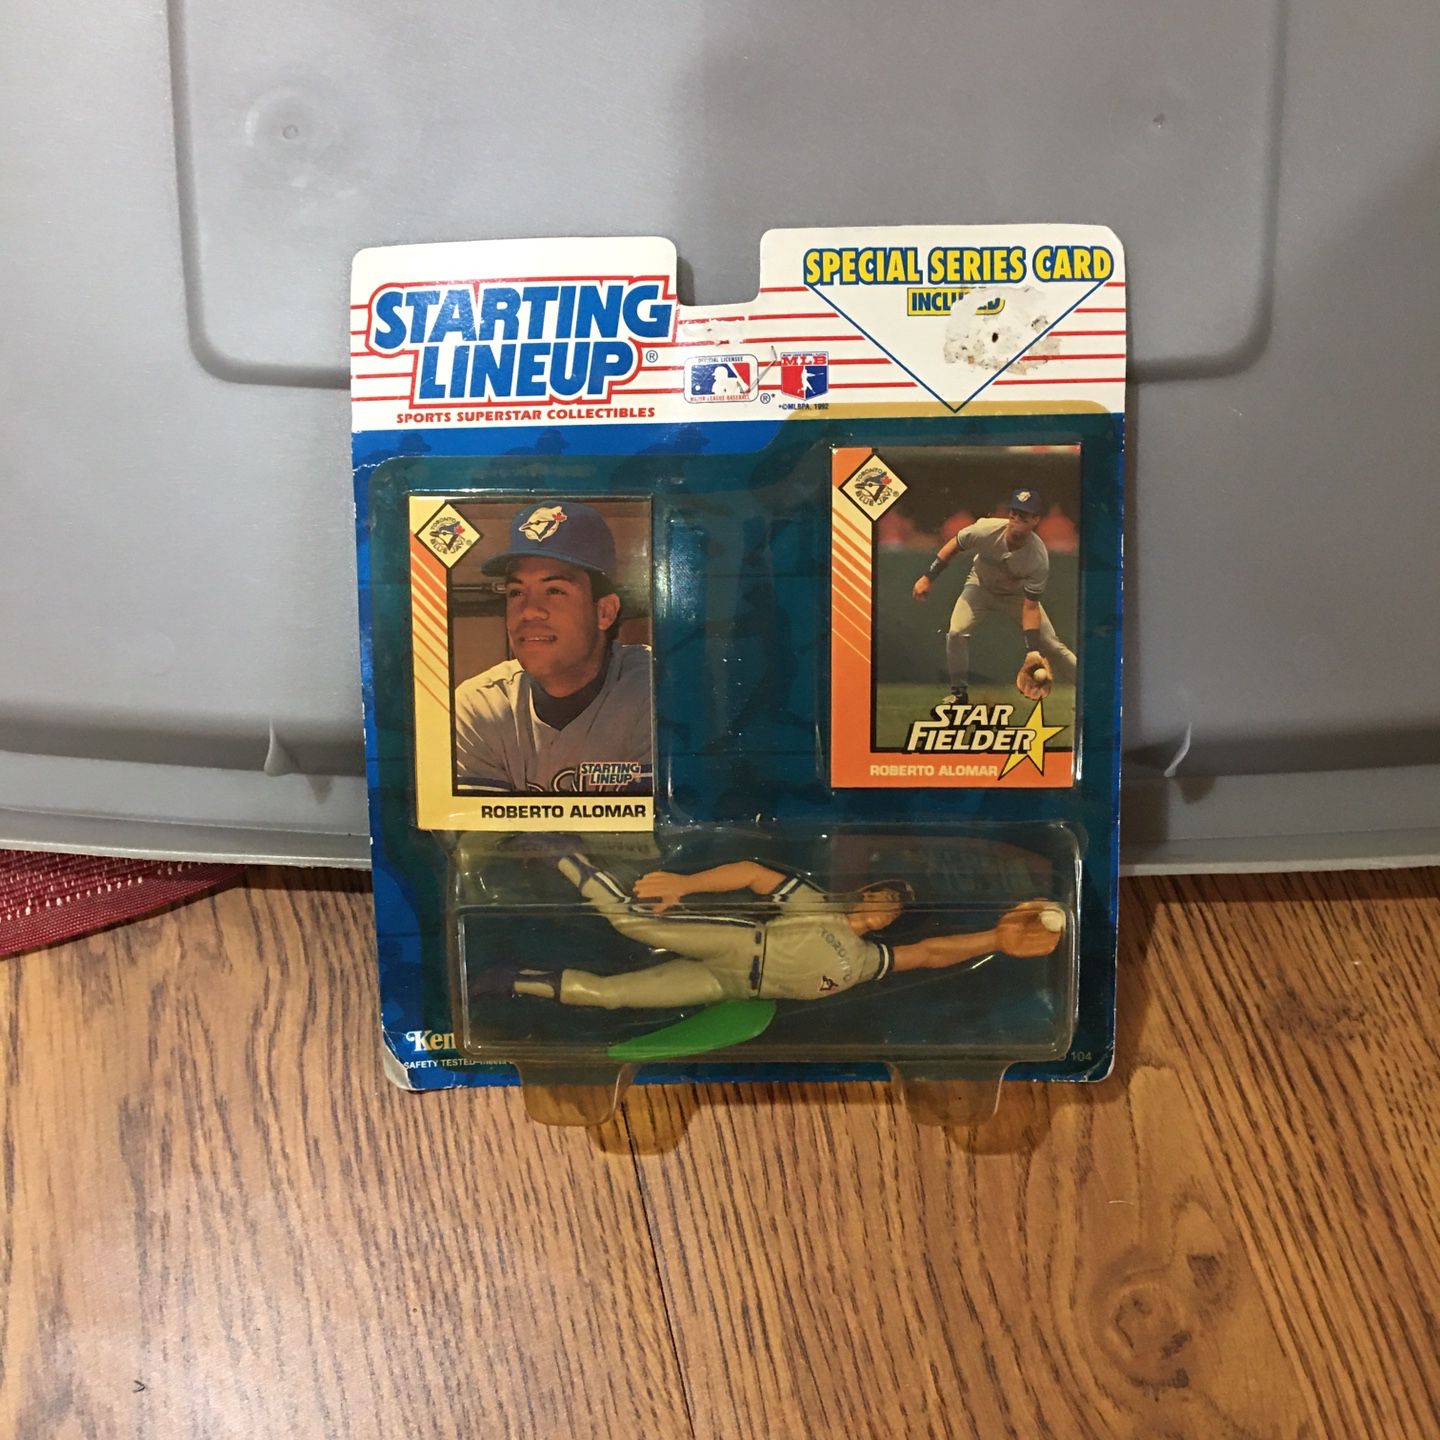 Starting Lineup 1993 Special Series Card Included Roberto Alomar Action Figure